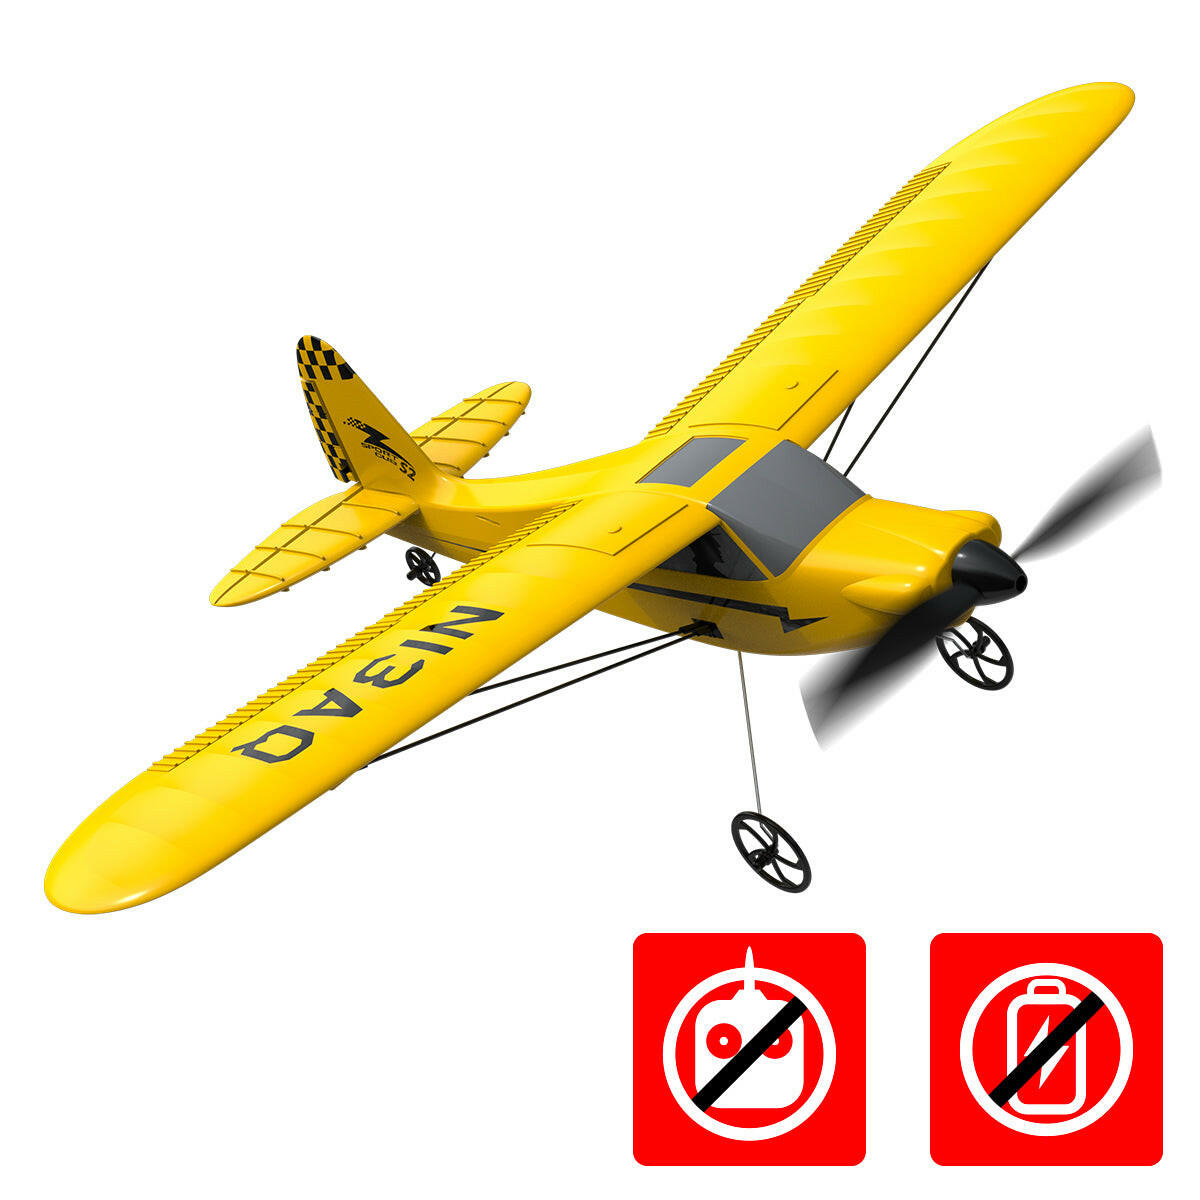 Copy of VOLANTEXRC 3CH Sport Cub S2 Remote Control Airplane for Beginners with Xpilot Stabilizer Easy to Fly (761-14) PNP.